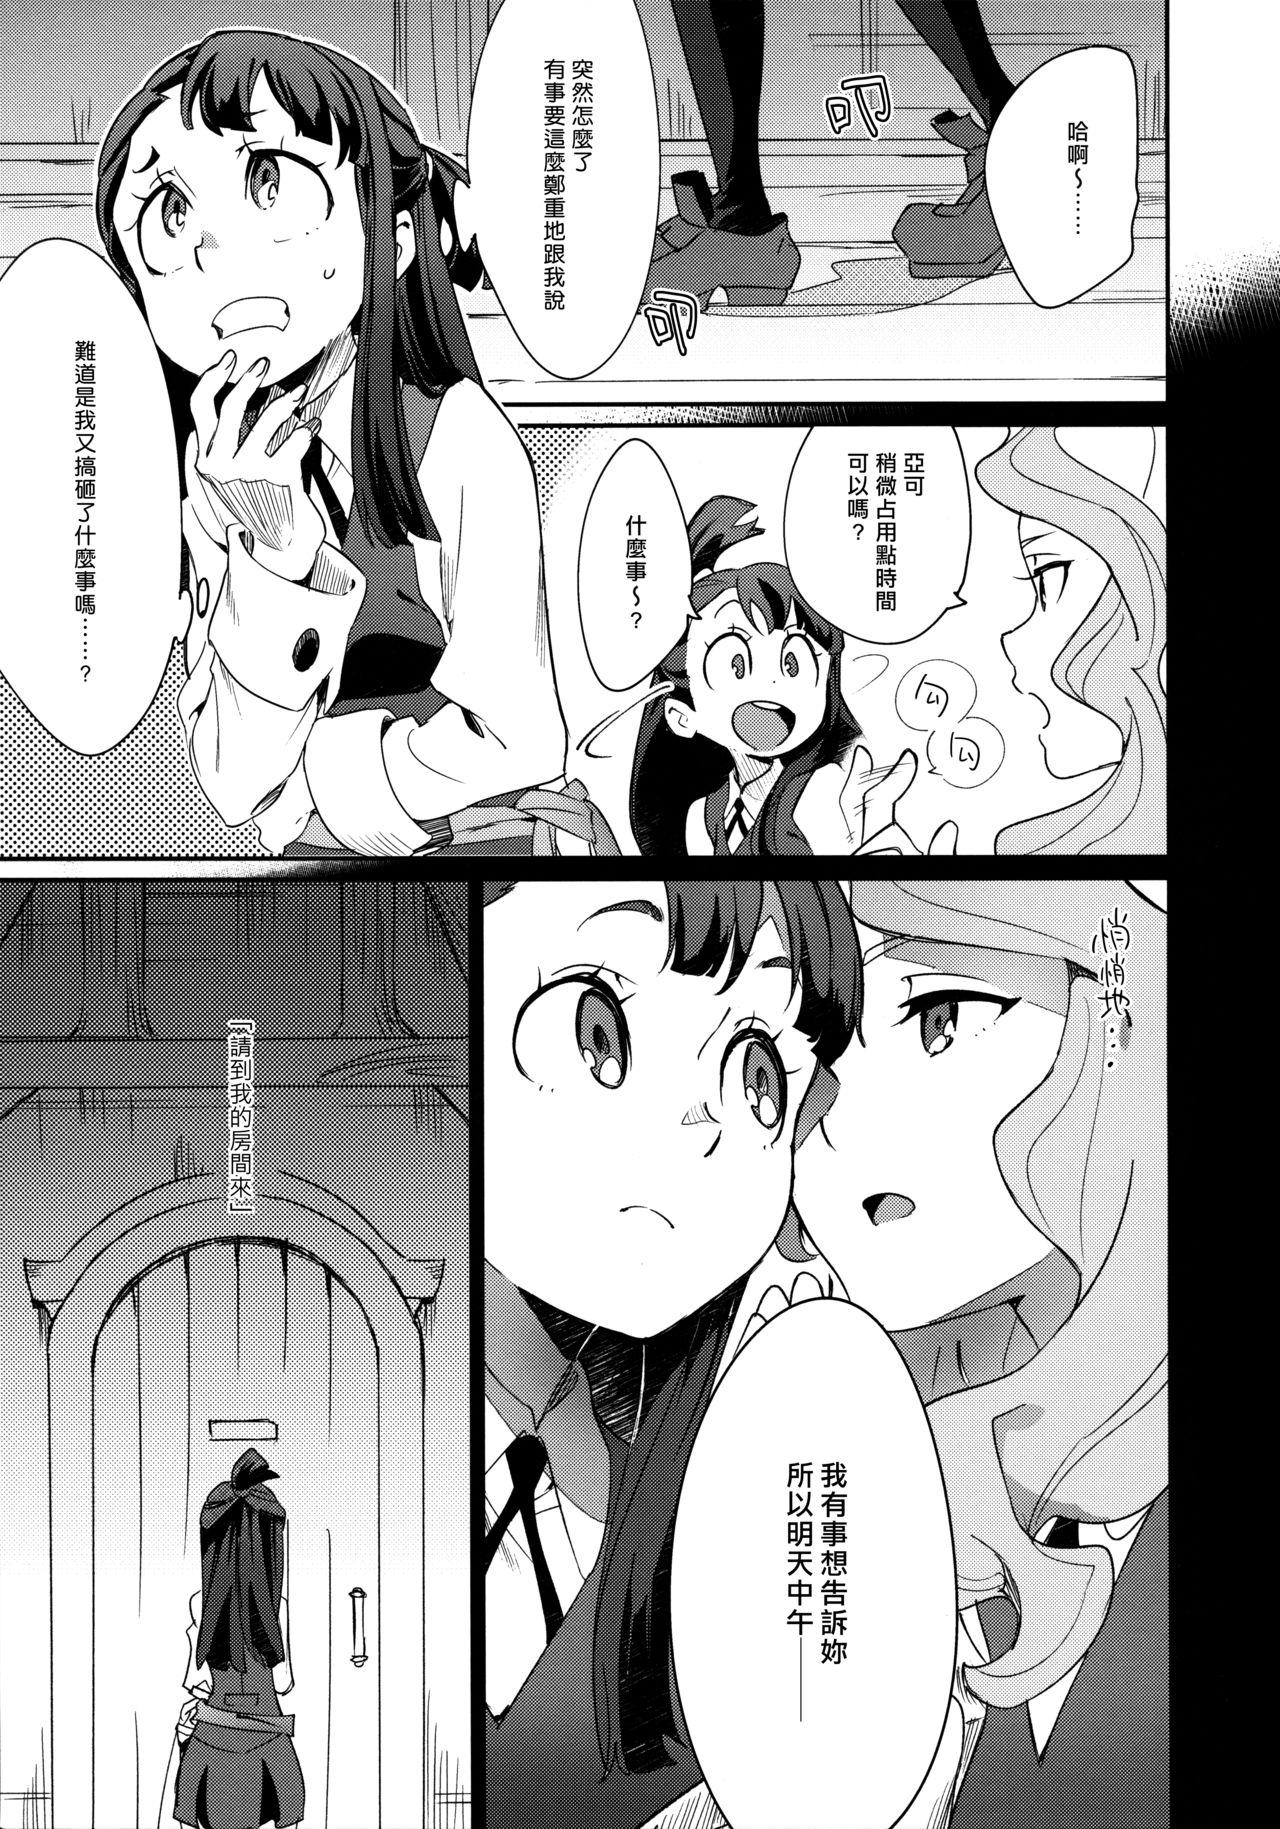 Gagging xxx - Little witch academia Argentina - Page 5